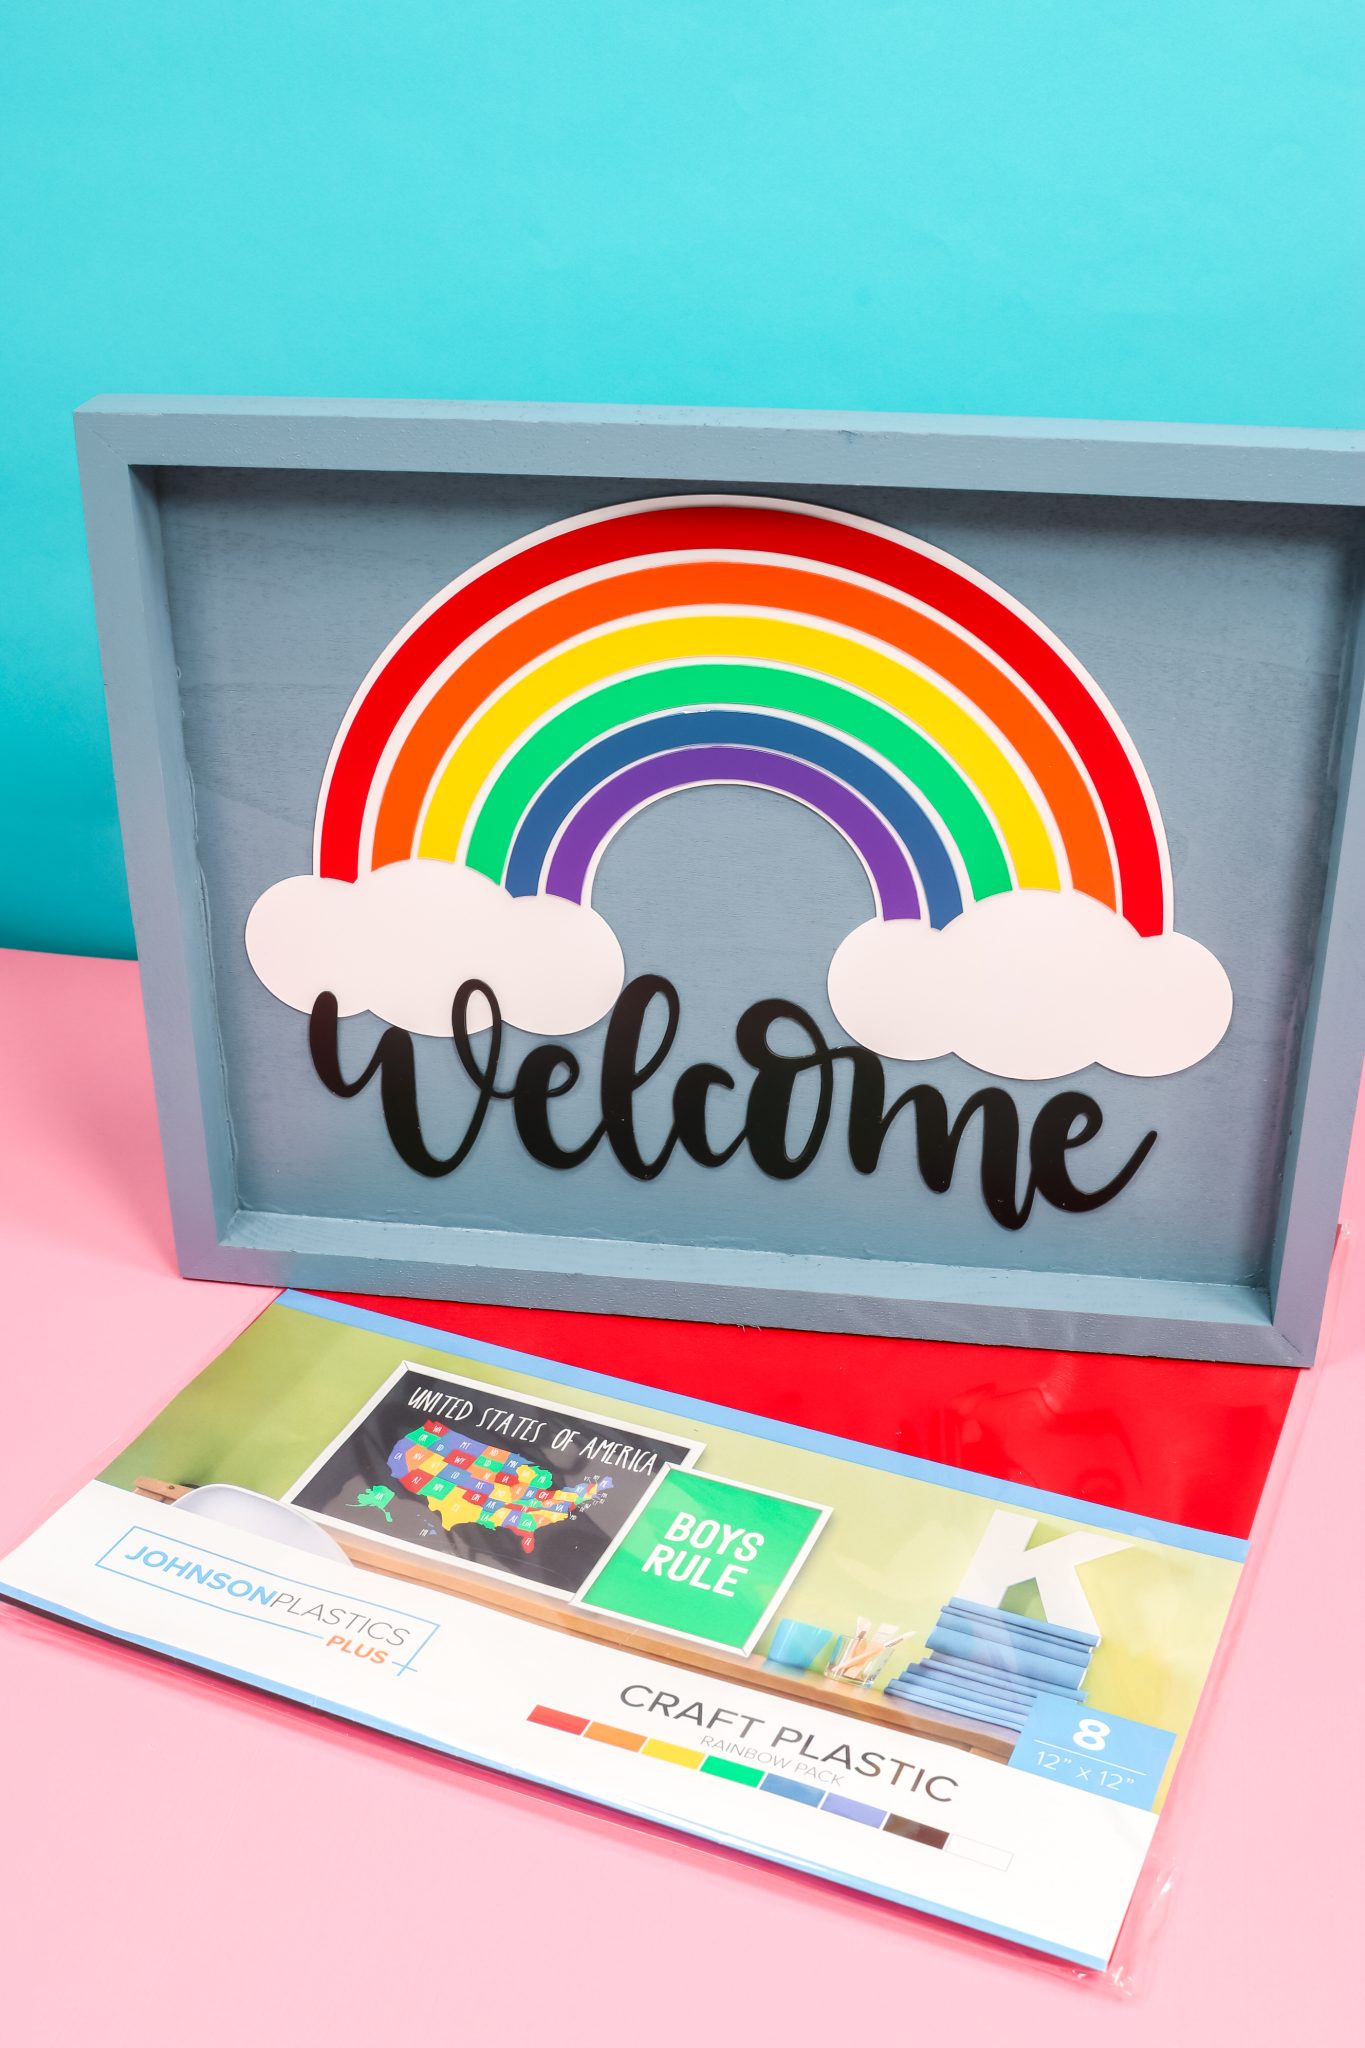 The welcome sign is finished with plastic scraps crafted with the Cricut Maker.